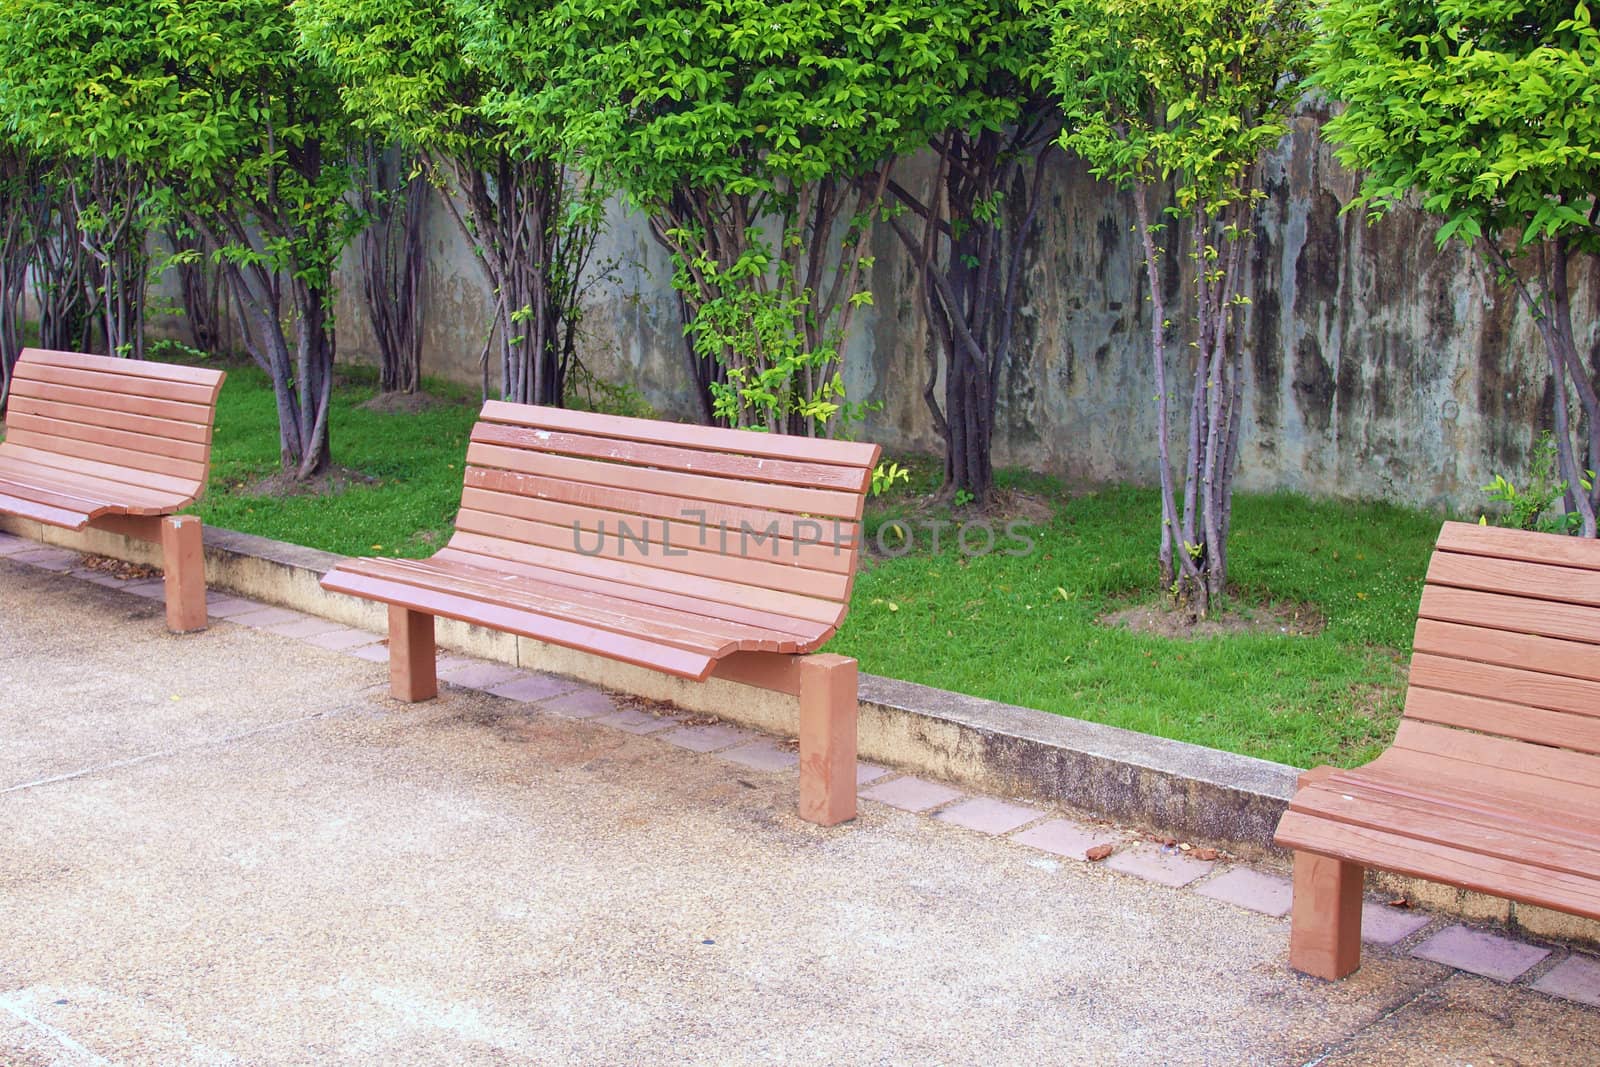 Wooden benches in the park  